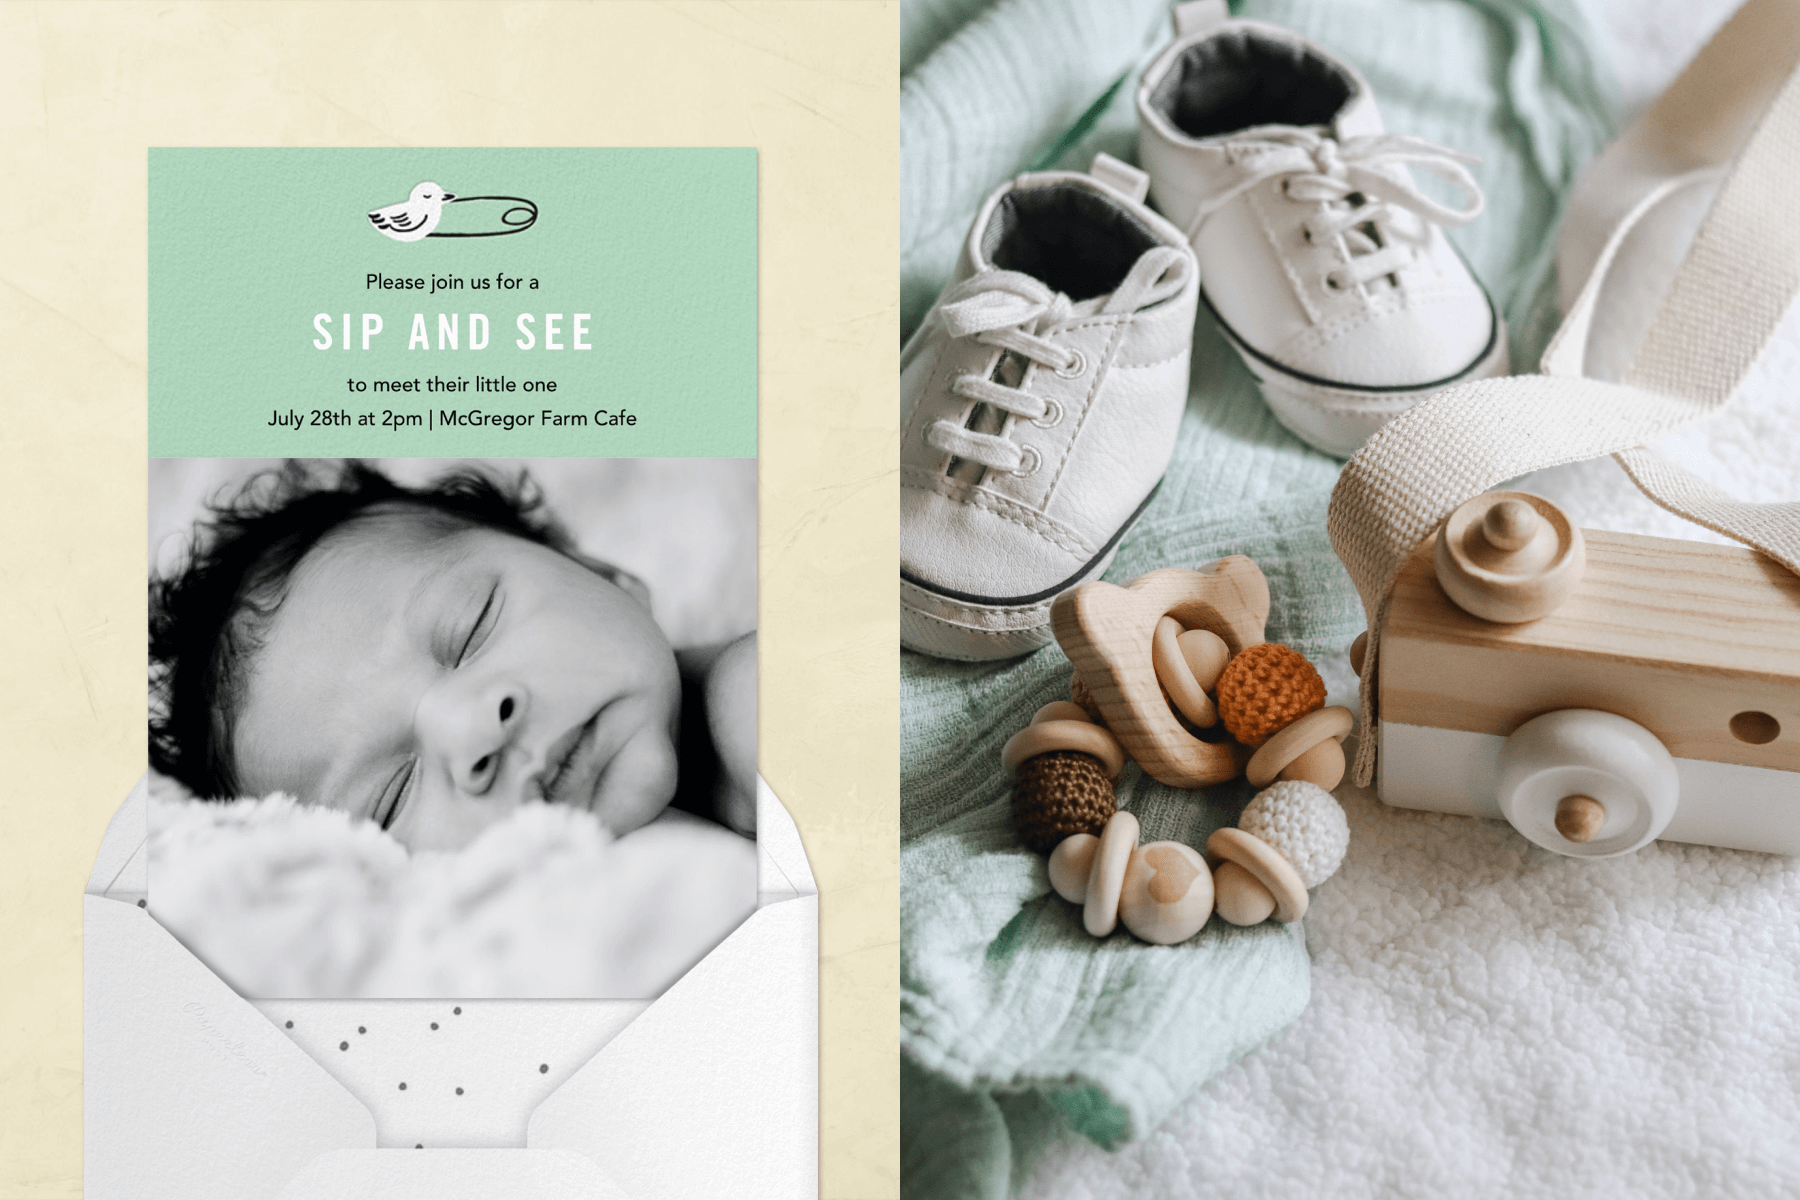 Left: A sip and see invitation shows a black and white photo of a sleeping infant below a mint green stripe with a duckling diaper safety pin. Right: White baby sneakers next to a wooden baby teething ring and wooden camera toy.